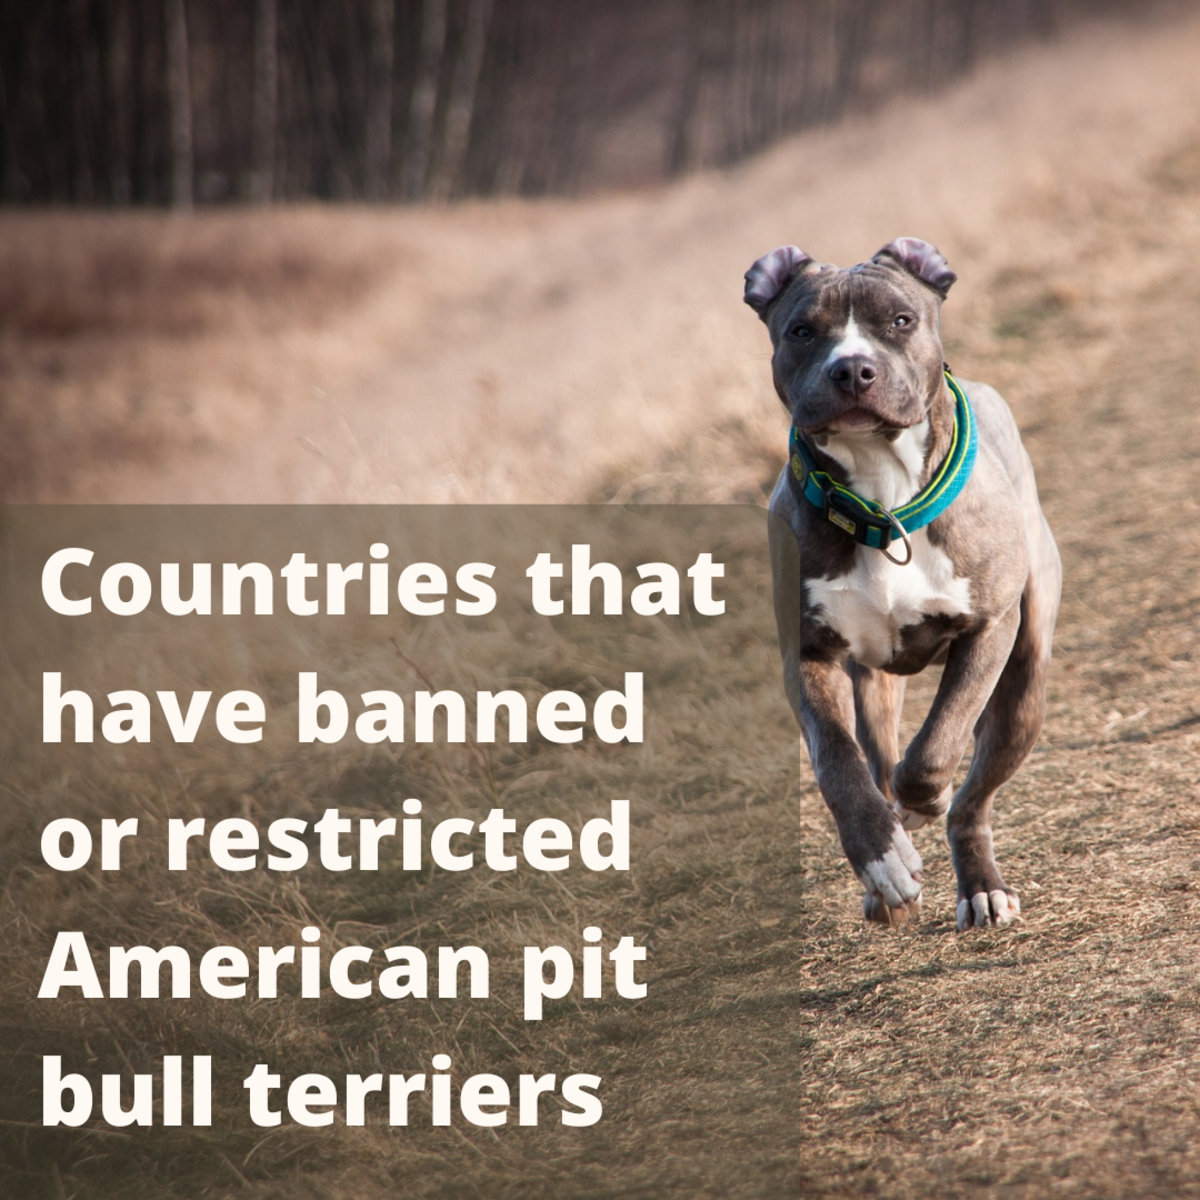 can a american pit bull terrier live in switzerland